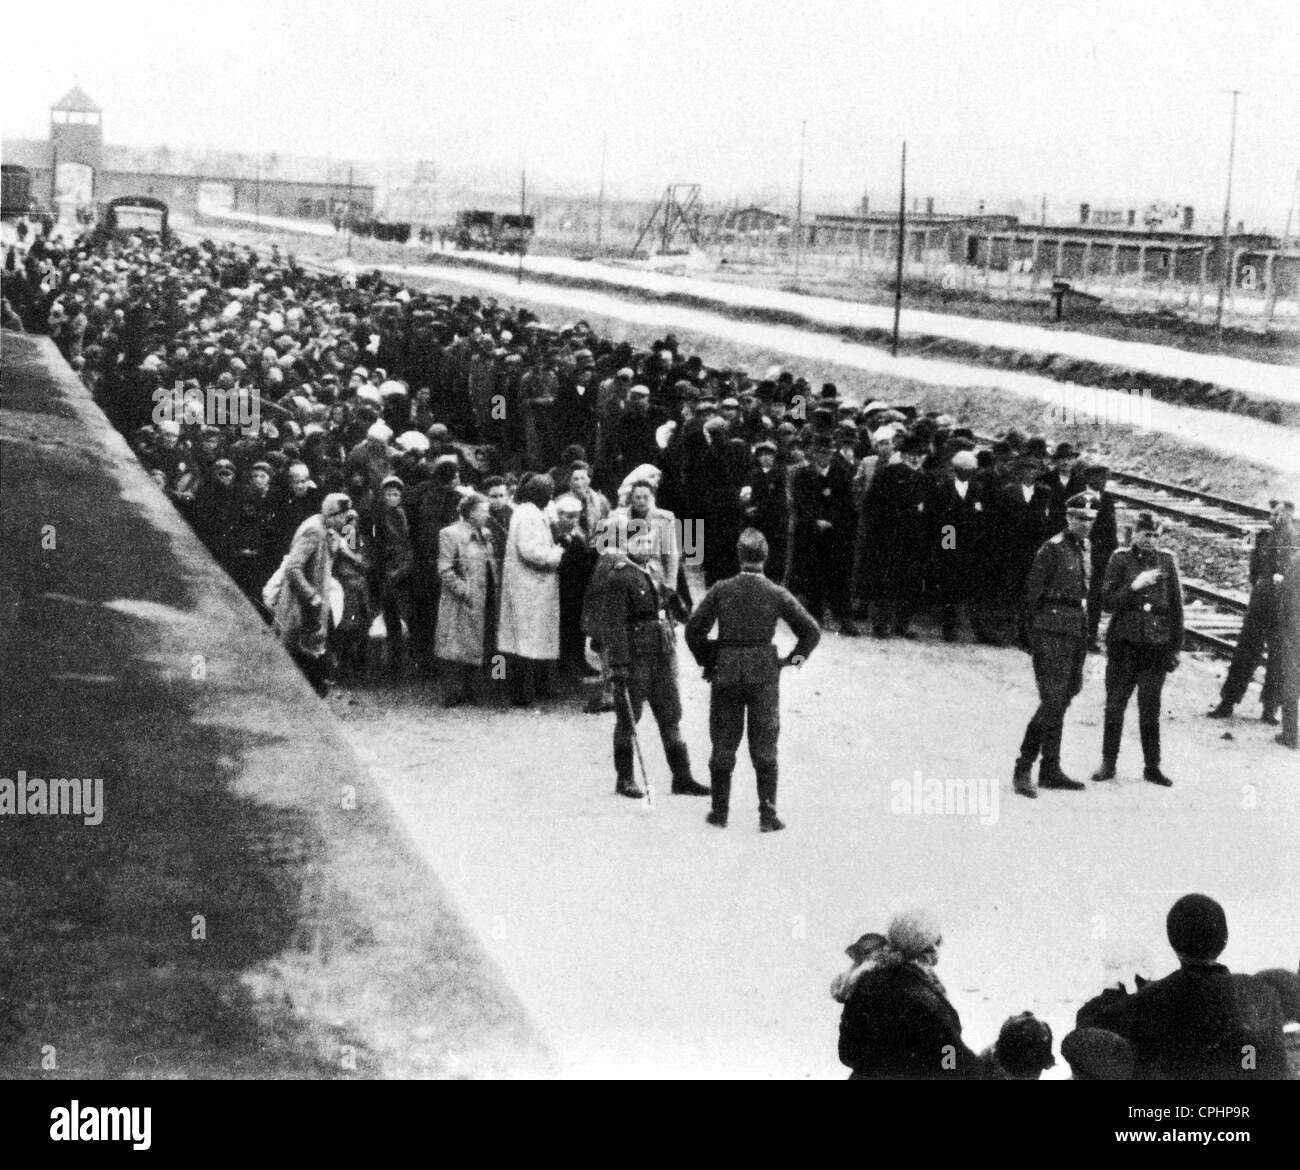 Arriving Jews on the 'ramp' at Auschwitz concentration camp, 1940-44 (b/w photo) Stock Photo